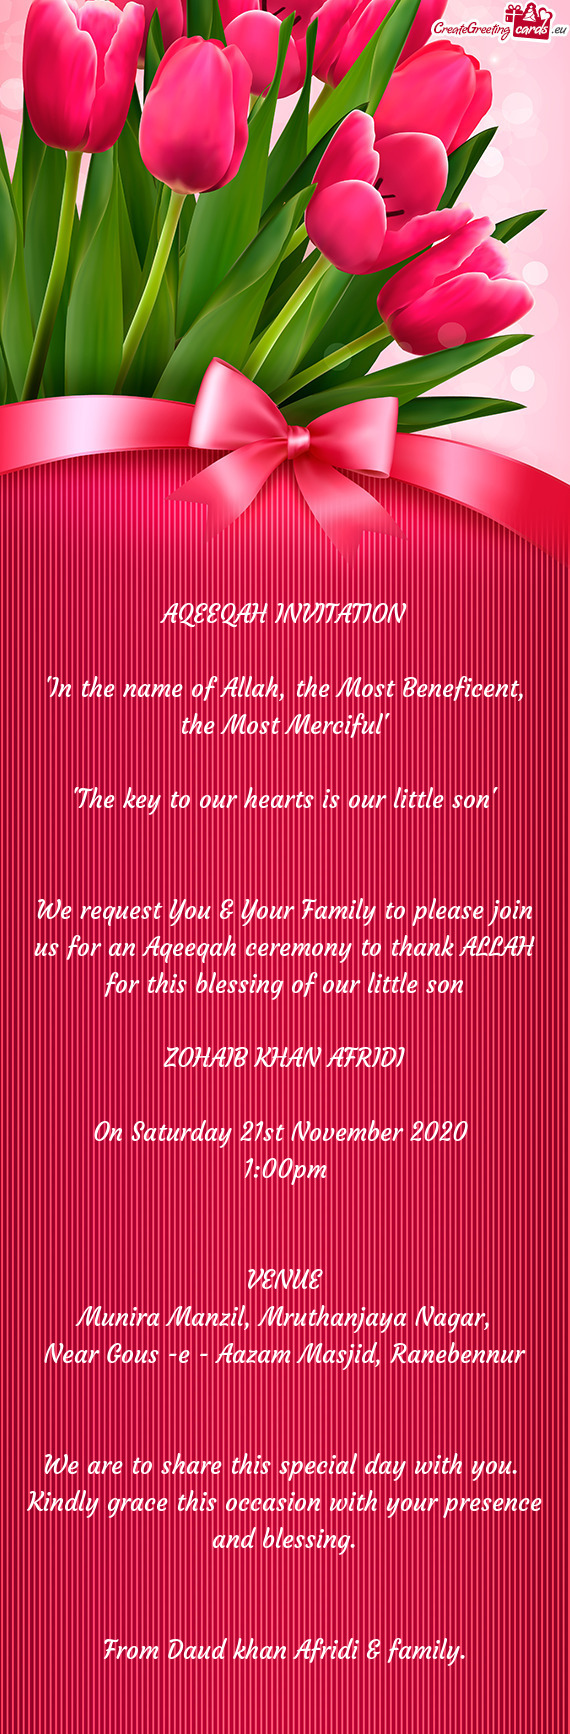 AQEEQAH INVITATION
 
 "In the name of Allah